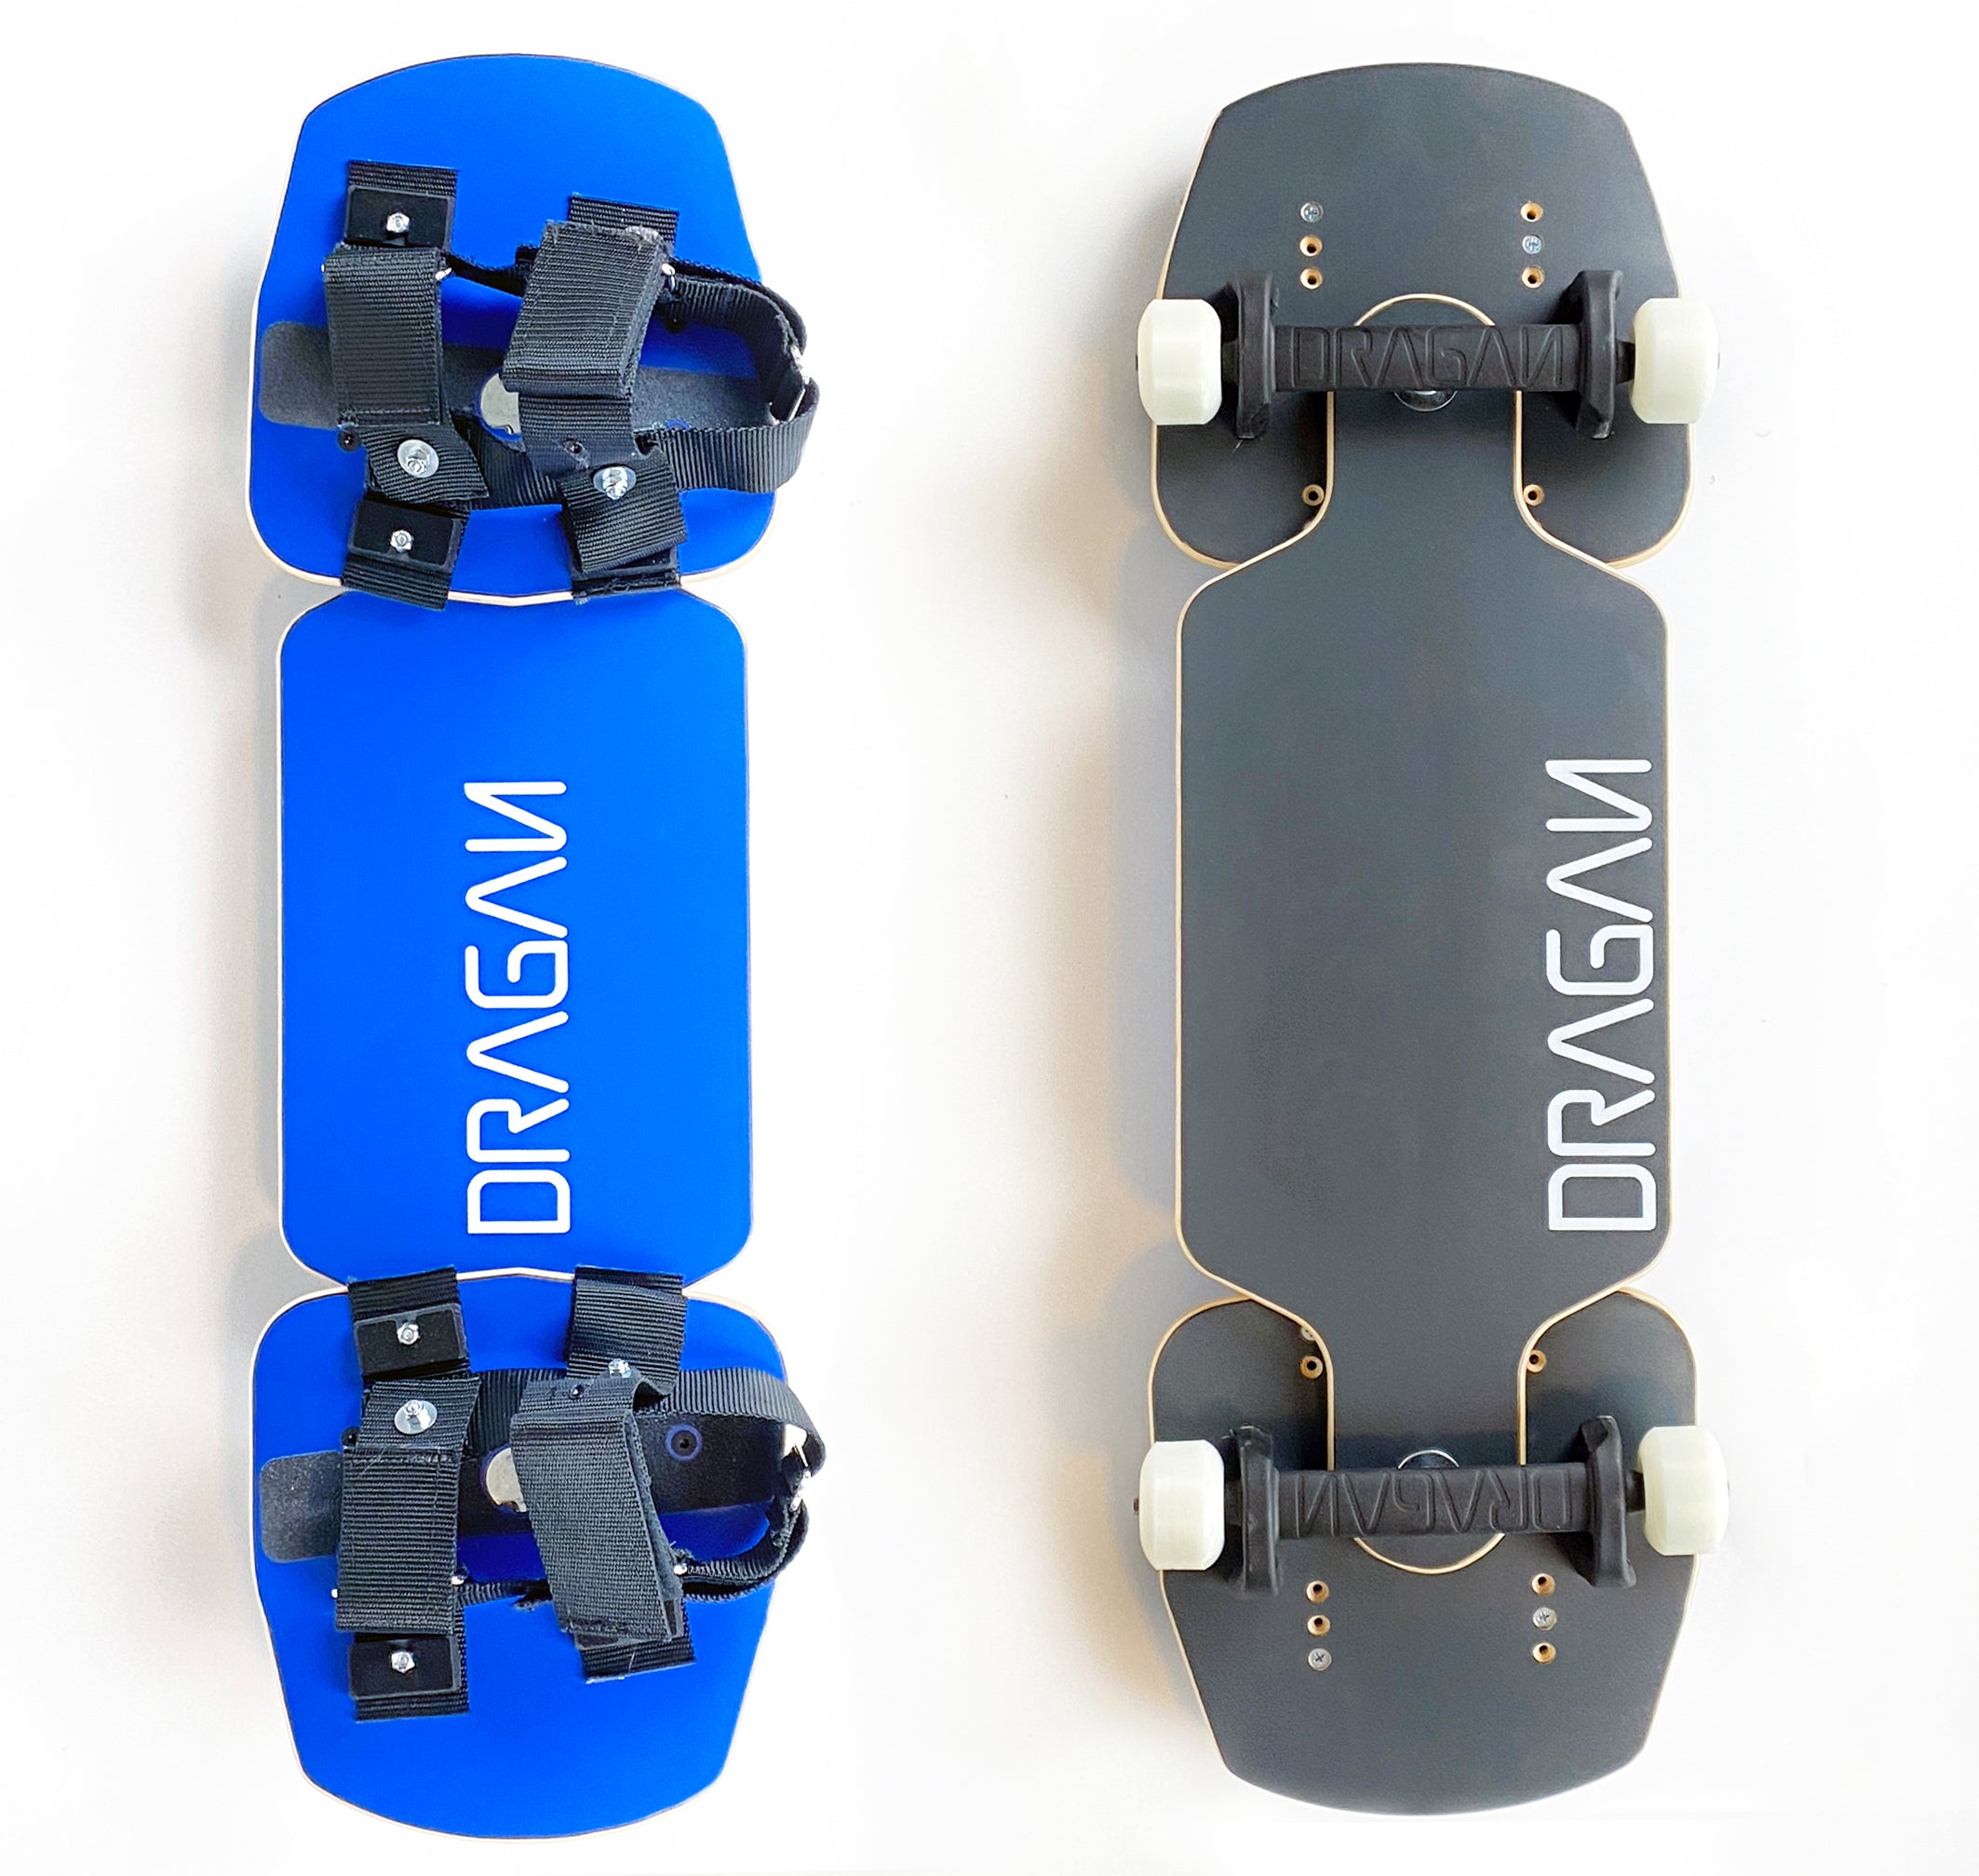 The Dragan Classic Snakeboard – Dragan Boards